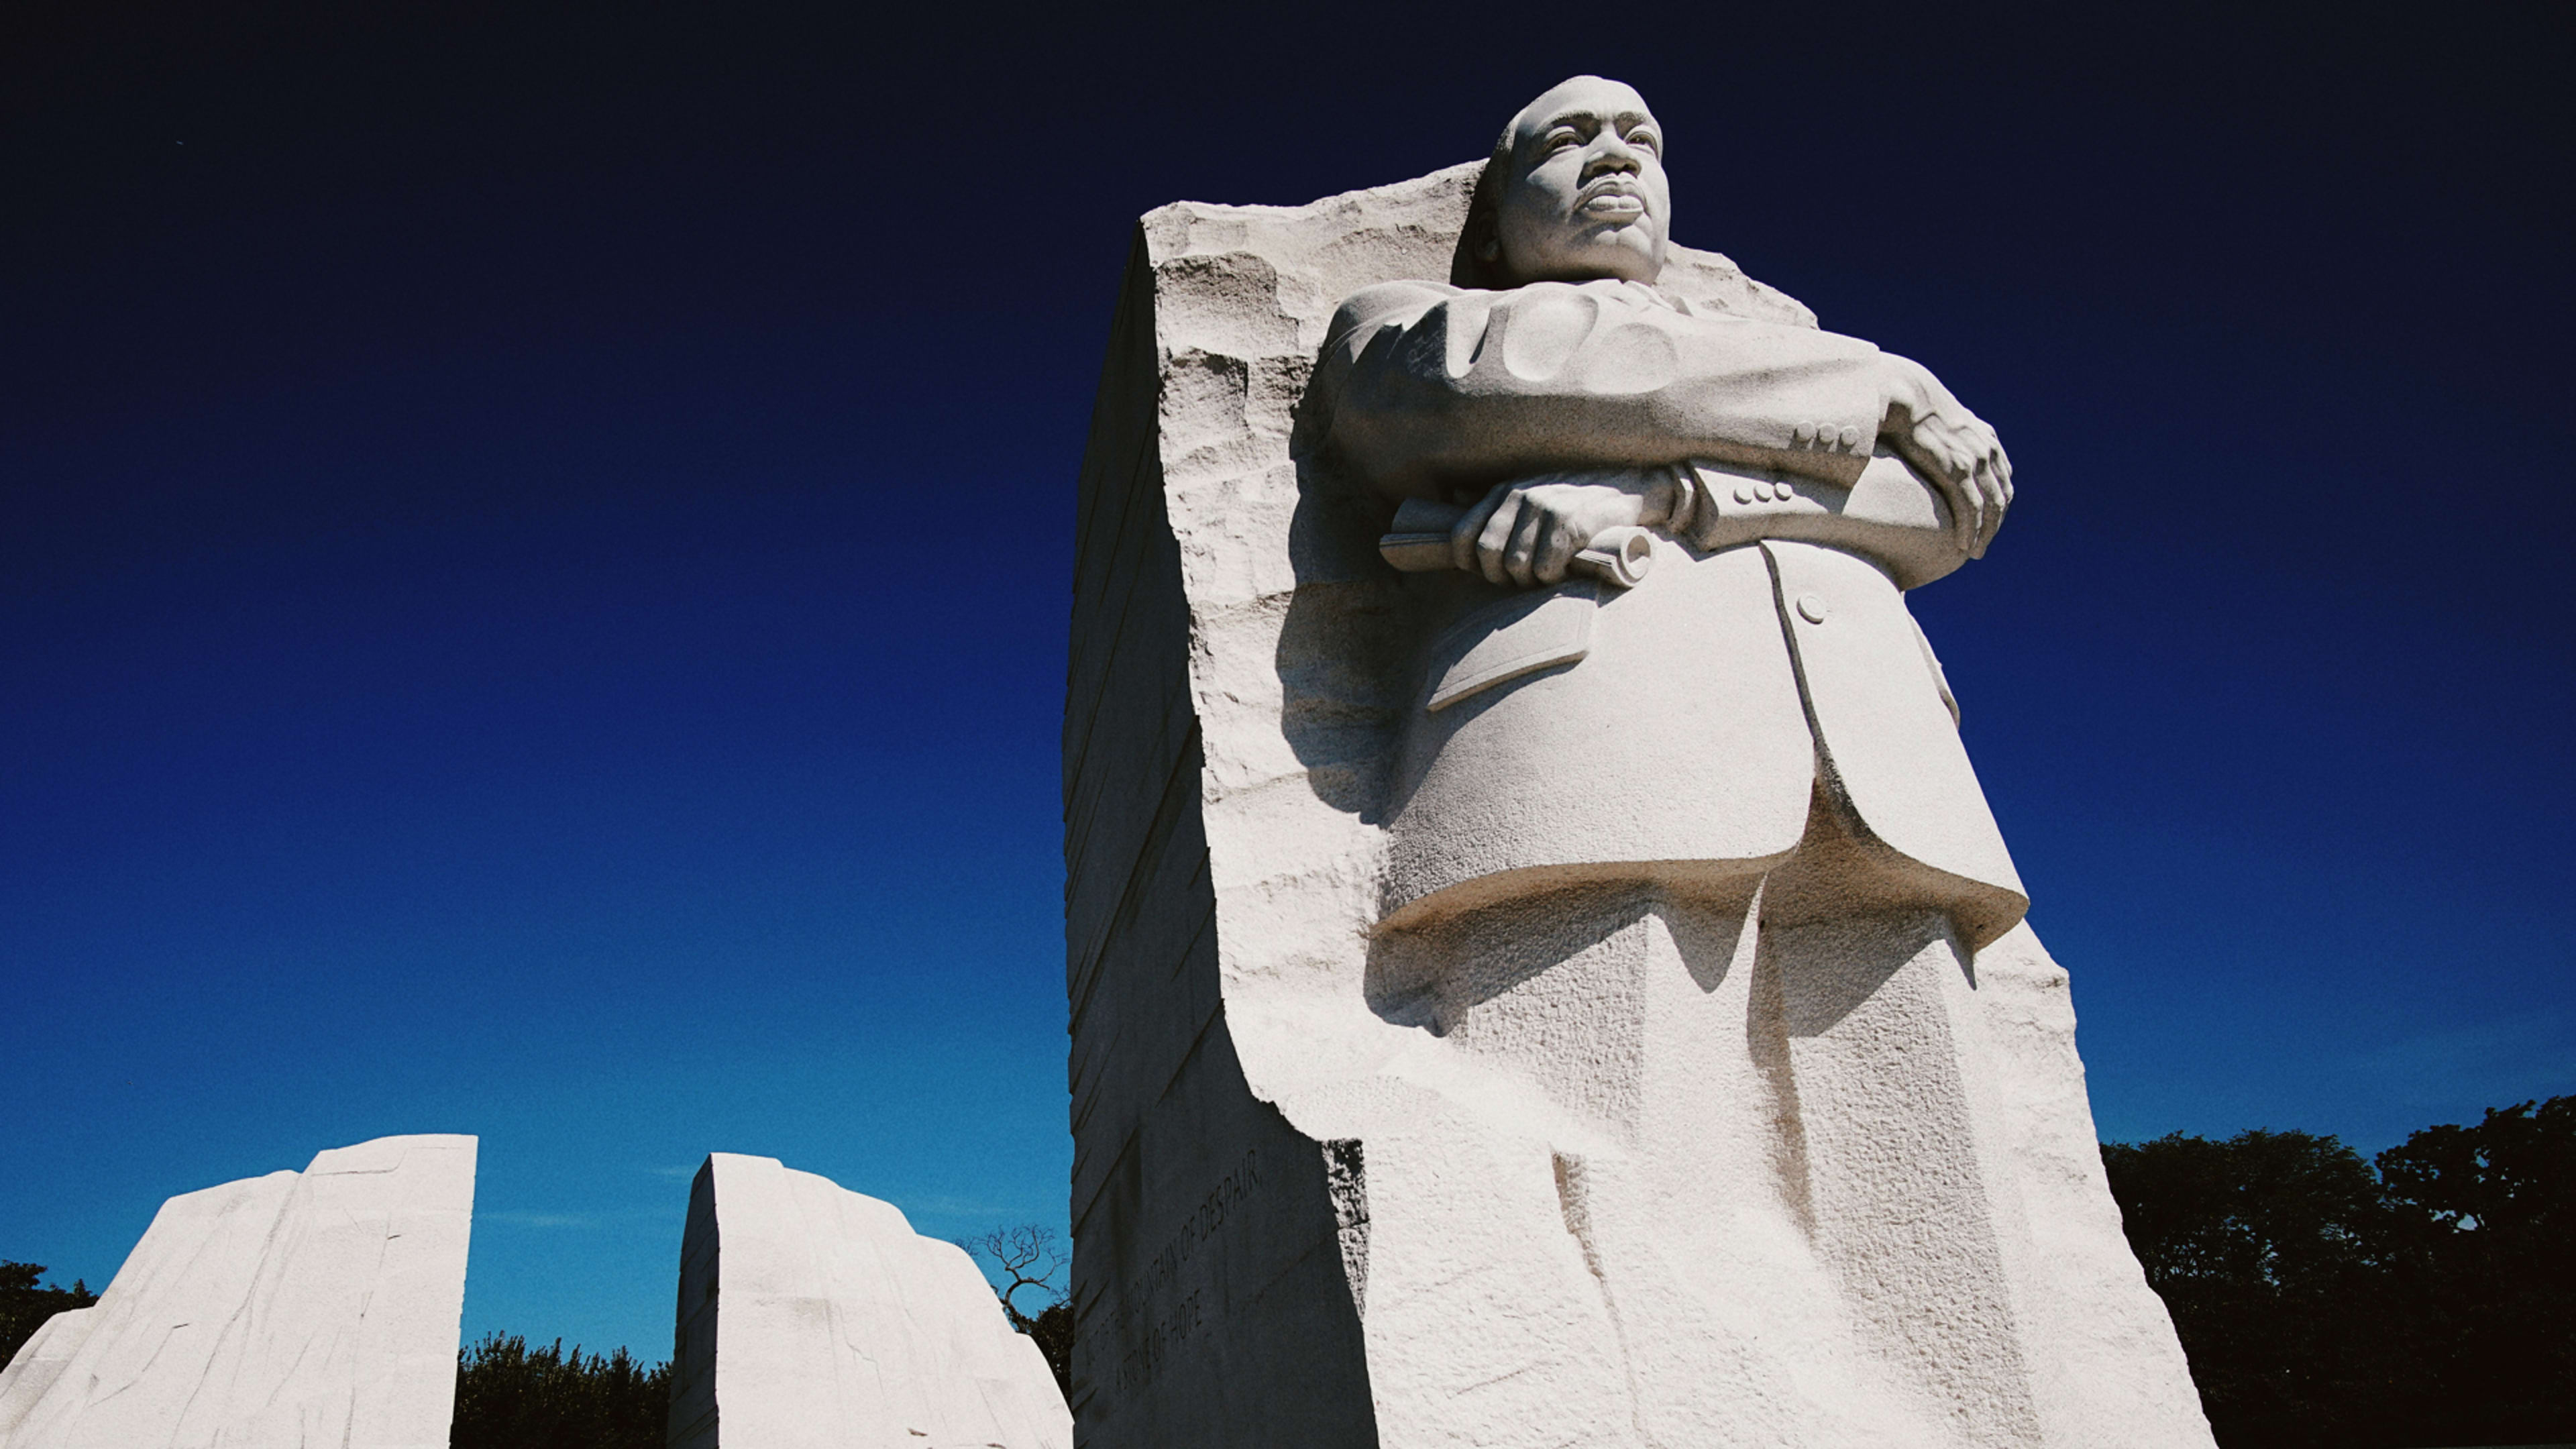 Most Americans still have to work on MLK Day. Here’s what’s open and closed